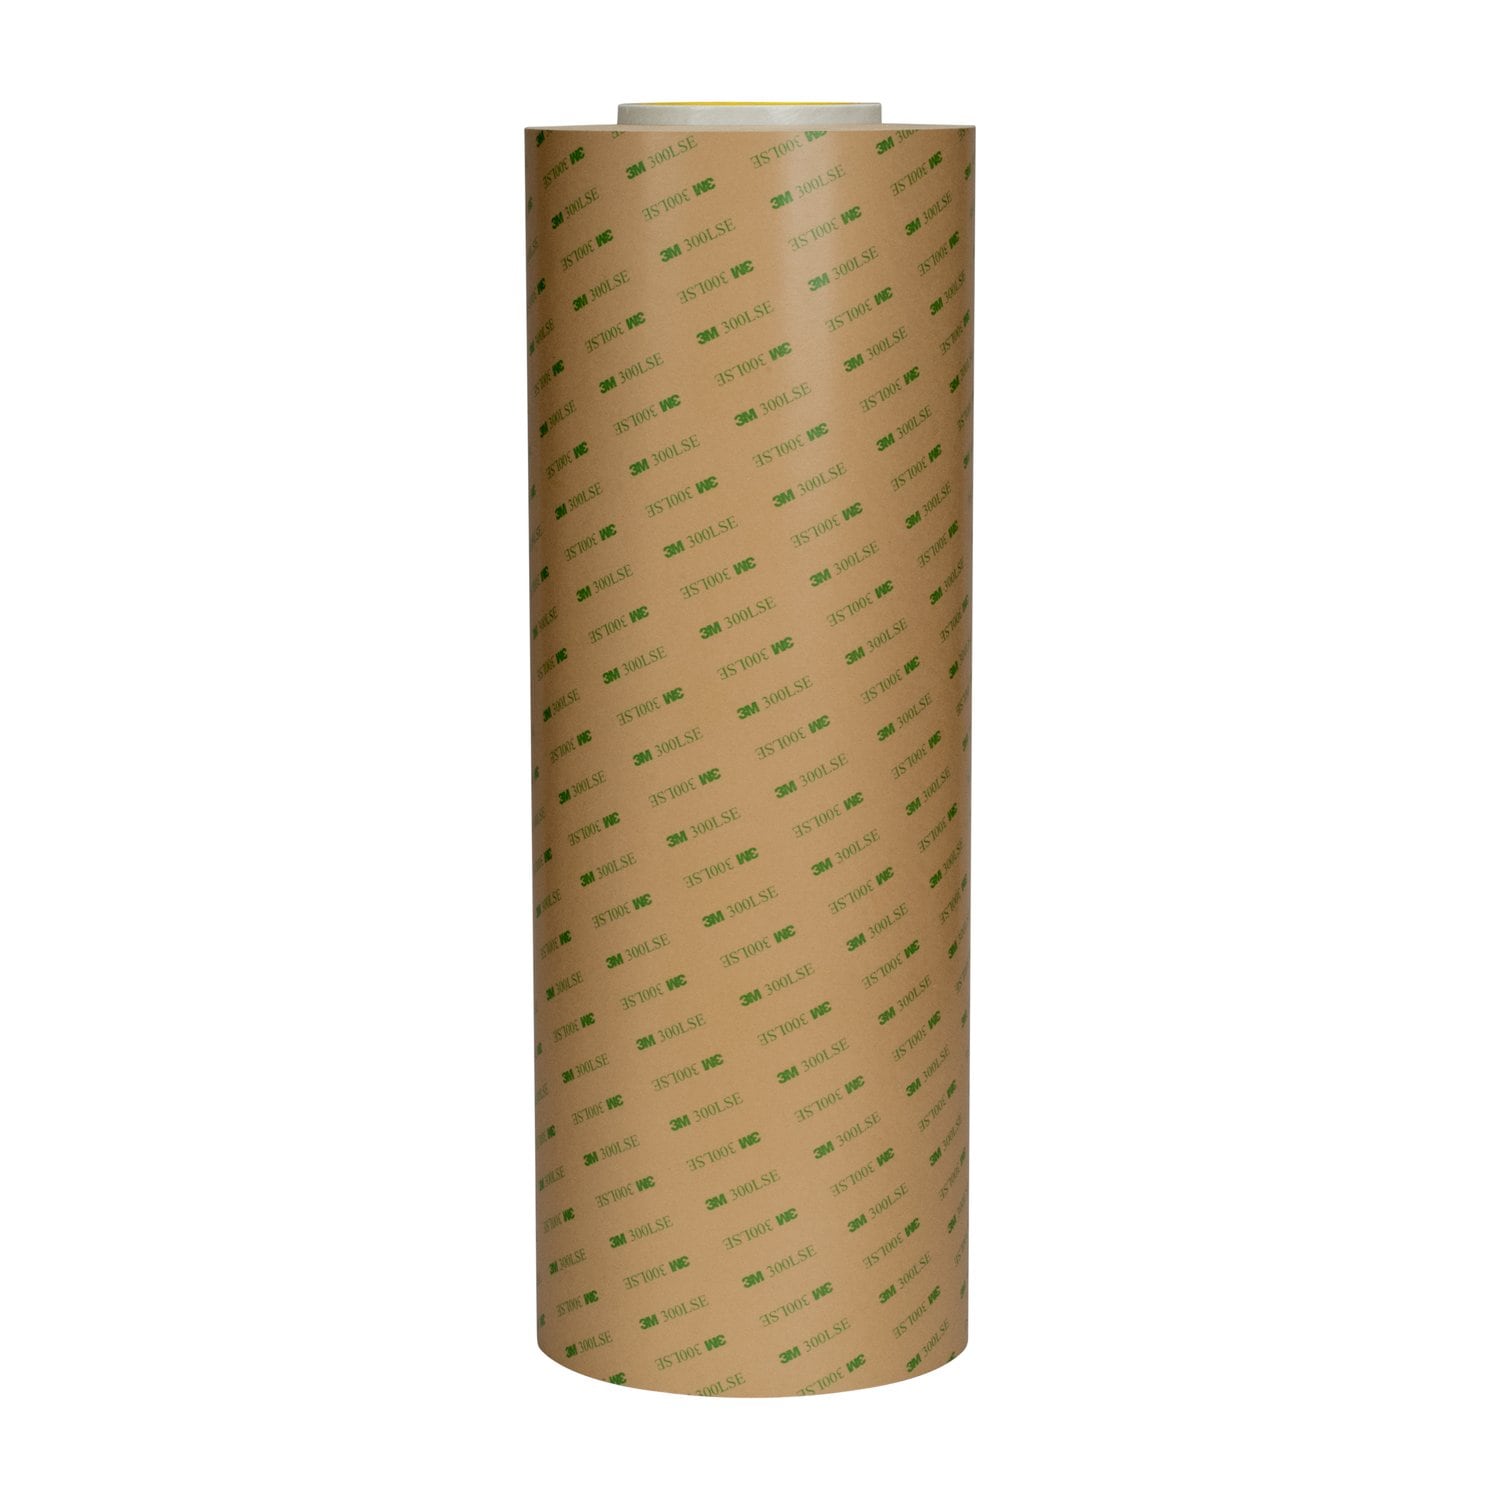 7000148441 - 3M Adhesive Transfer Tape 9671LE, Clear, 4 in x 10 yd, 2 mil, 1 roll
per case, Sample